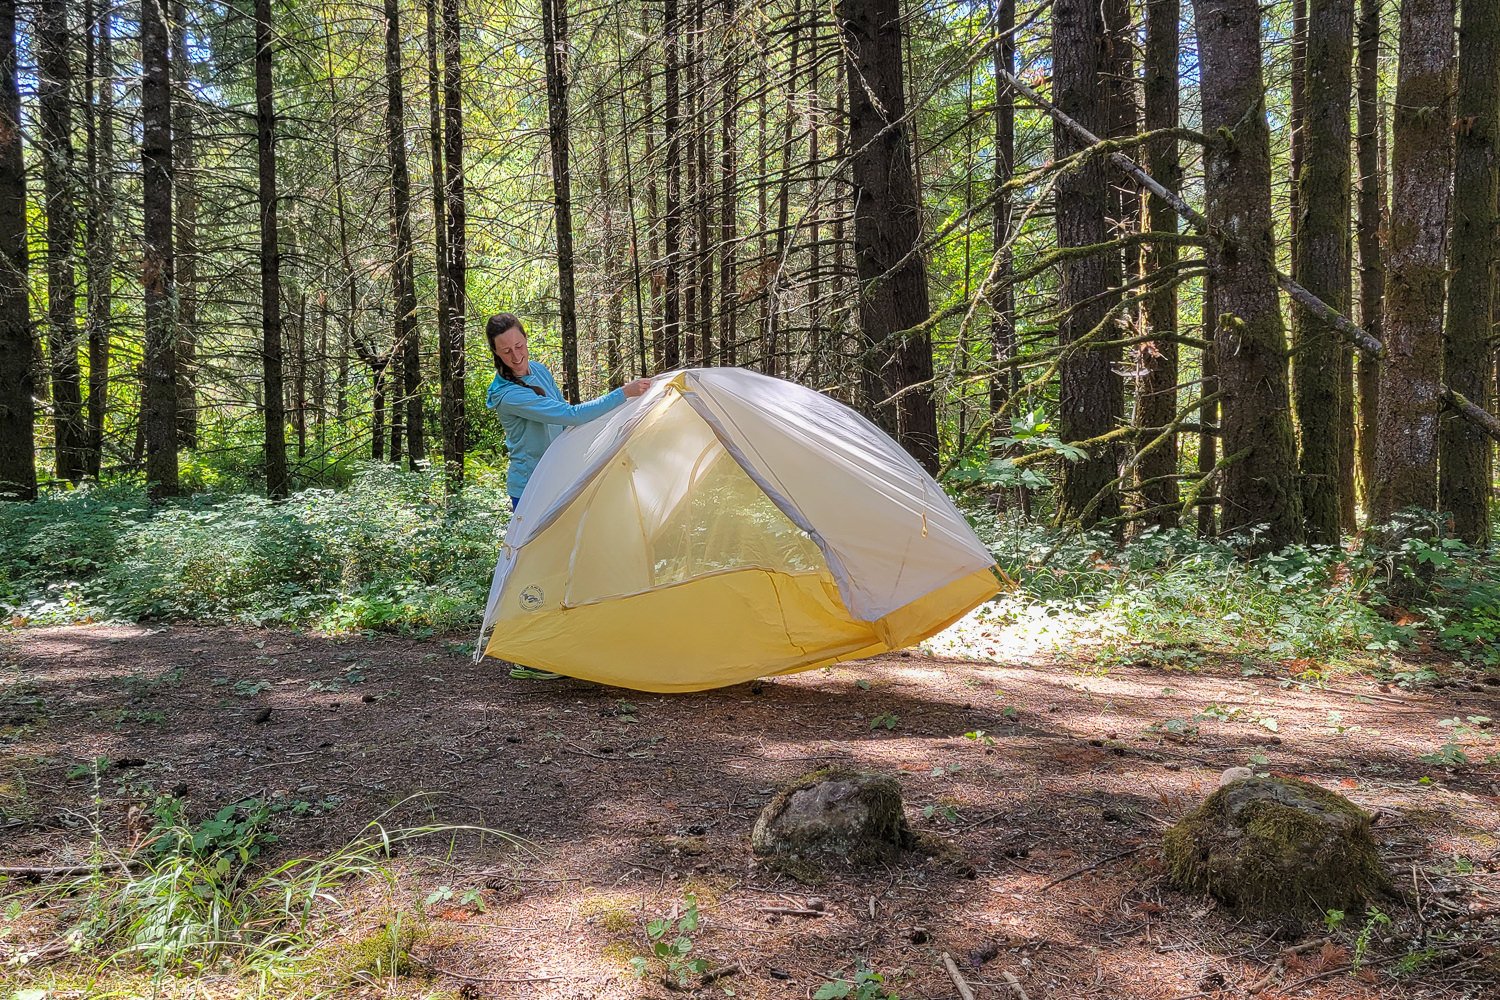 A hiker picking up the Big Agnes Tiger Wall UL2 tent and repositioning it in a campsite